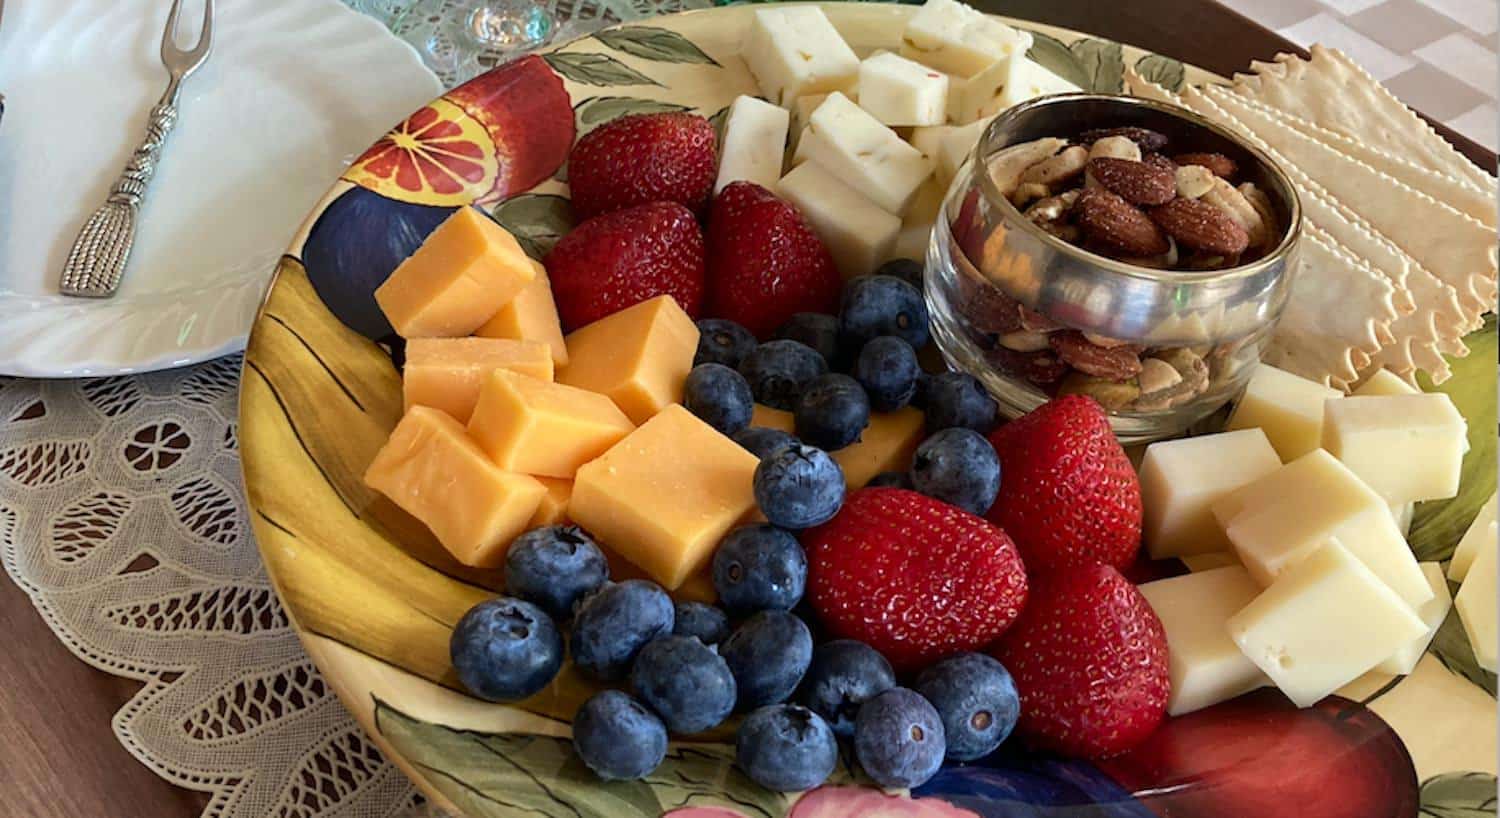 Close up view of plate full of multiple cheeses, strawberries, blueberries, crackers, and nuts